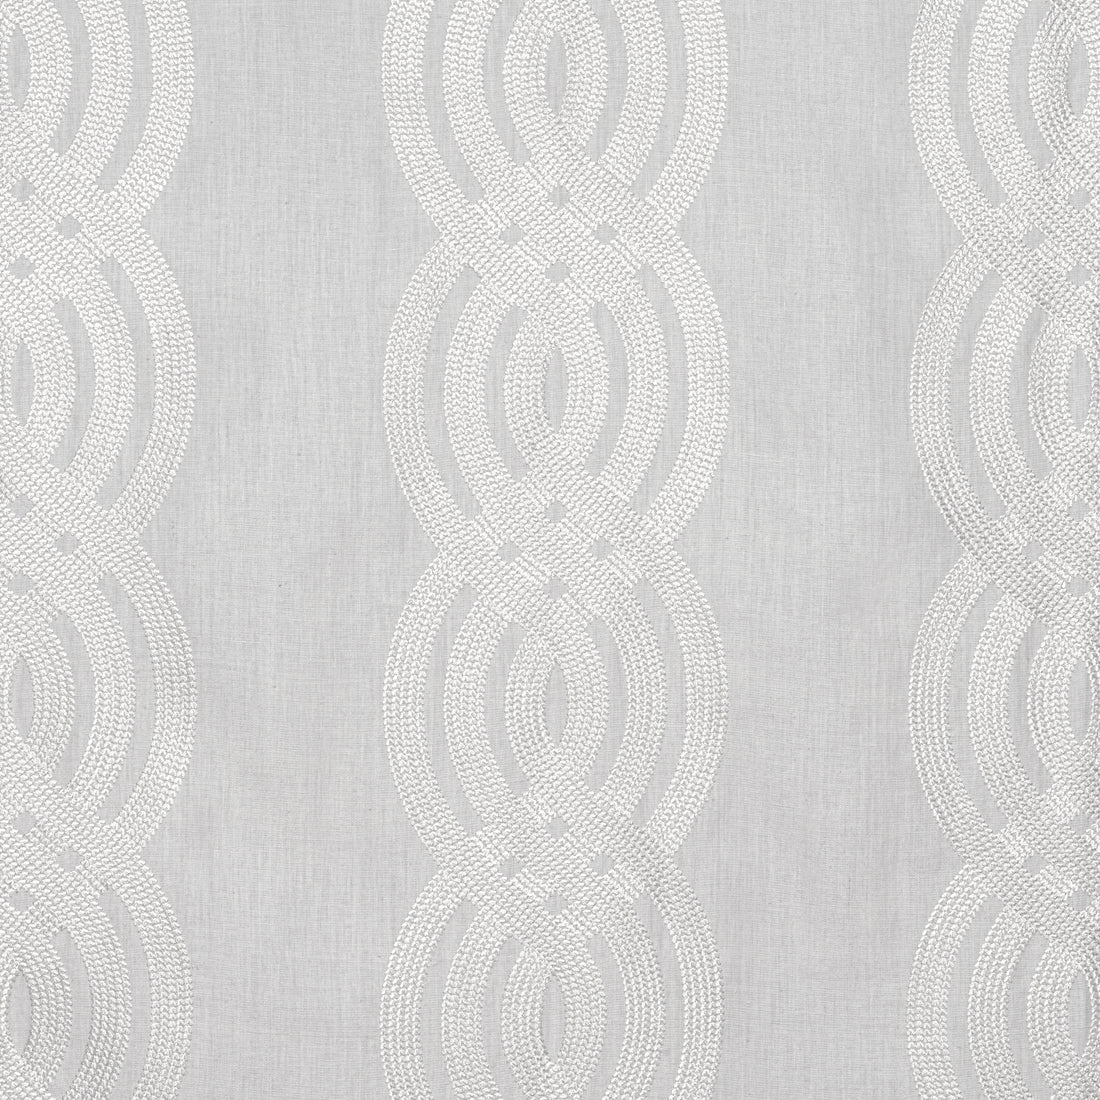 Braid Embroidery fabric in grey color - pattern number W710803 - by Thibaut in the Heritage collection